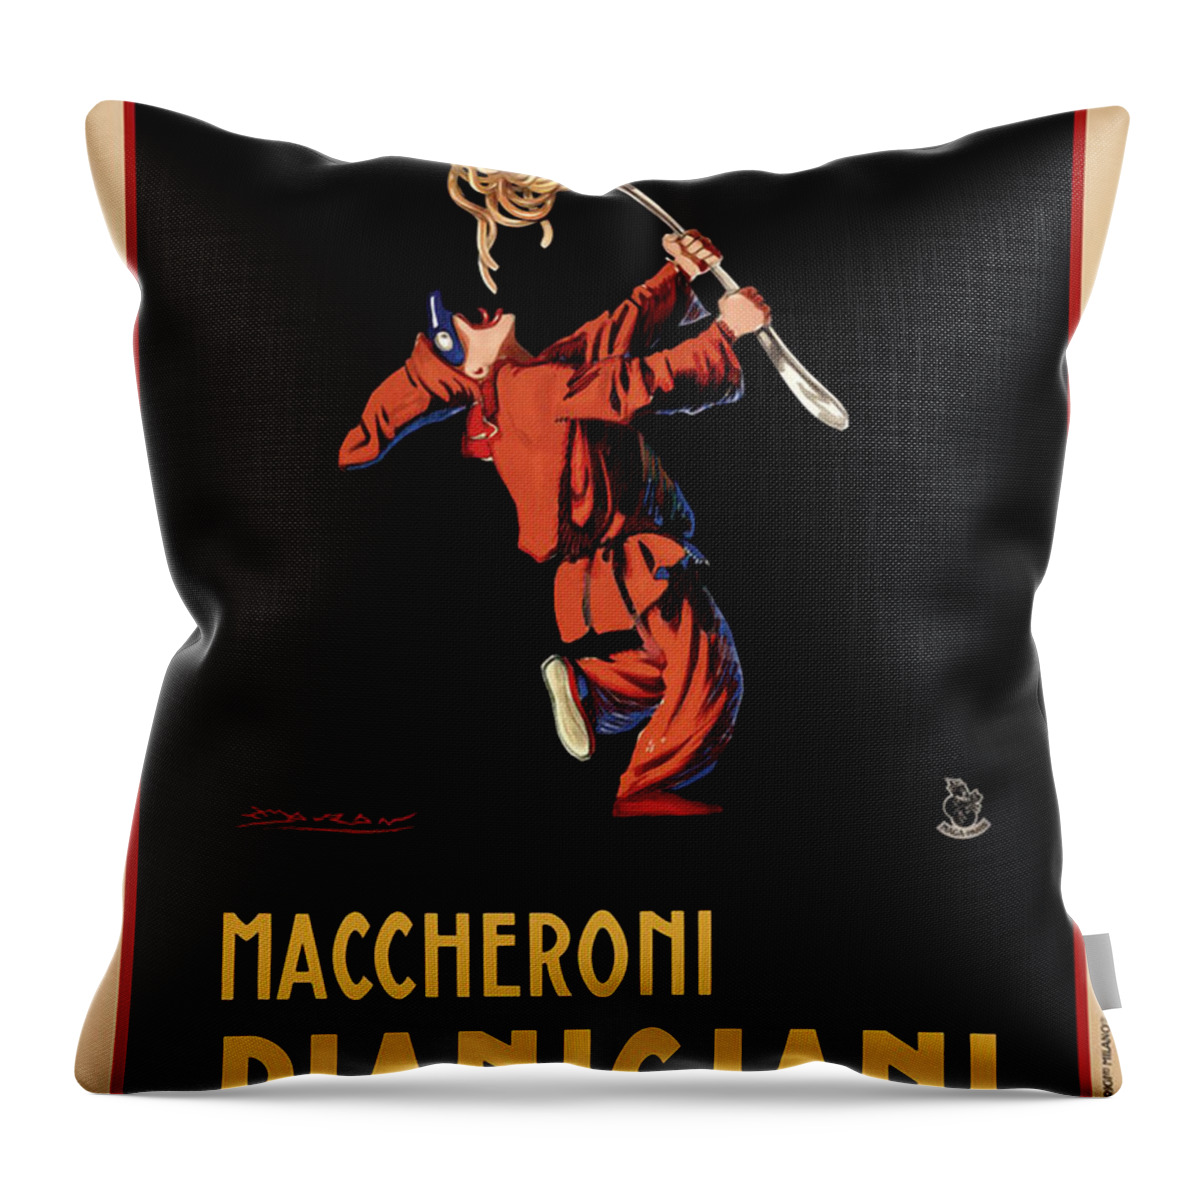 Pasta Throw Pillow featuring the painting Vintage Italian Pasta Advertising by Mindy Sommers